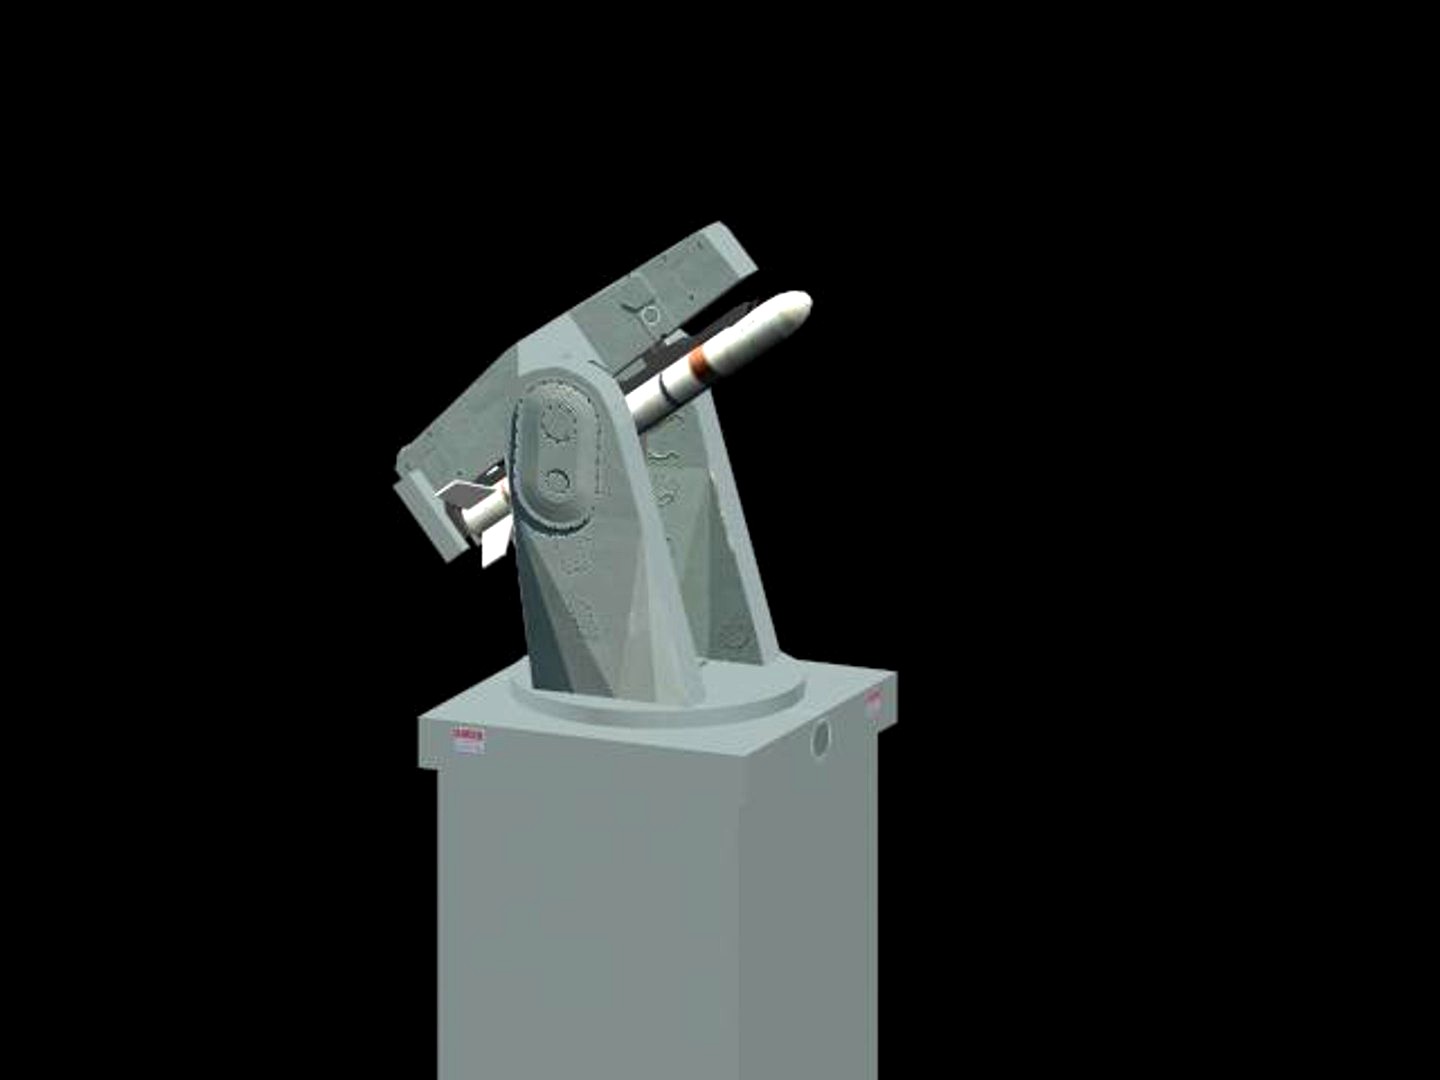 MK 13/22 HARPOON Guided Missile Launching System / w Animated Targeting and Missile Launch Sequences - by Xacta  3D models